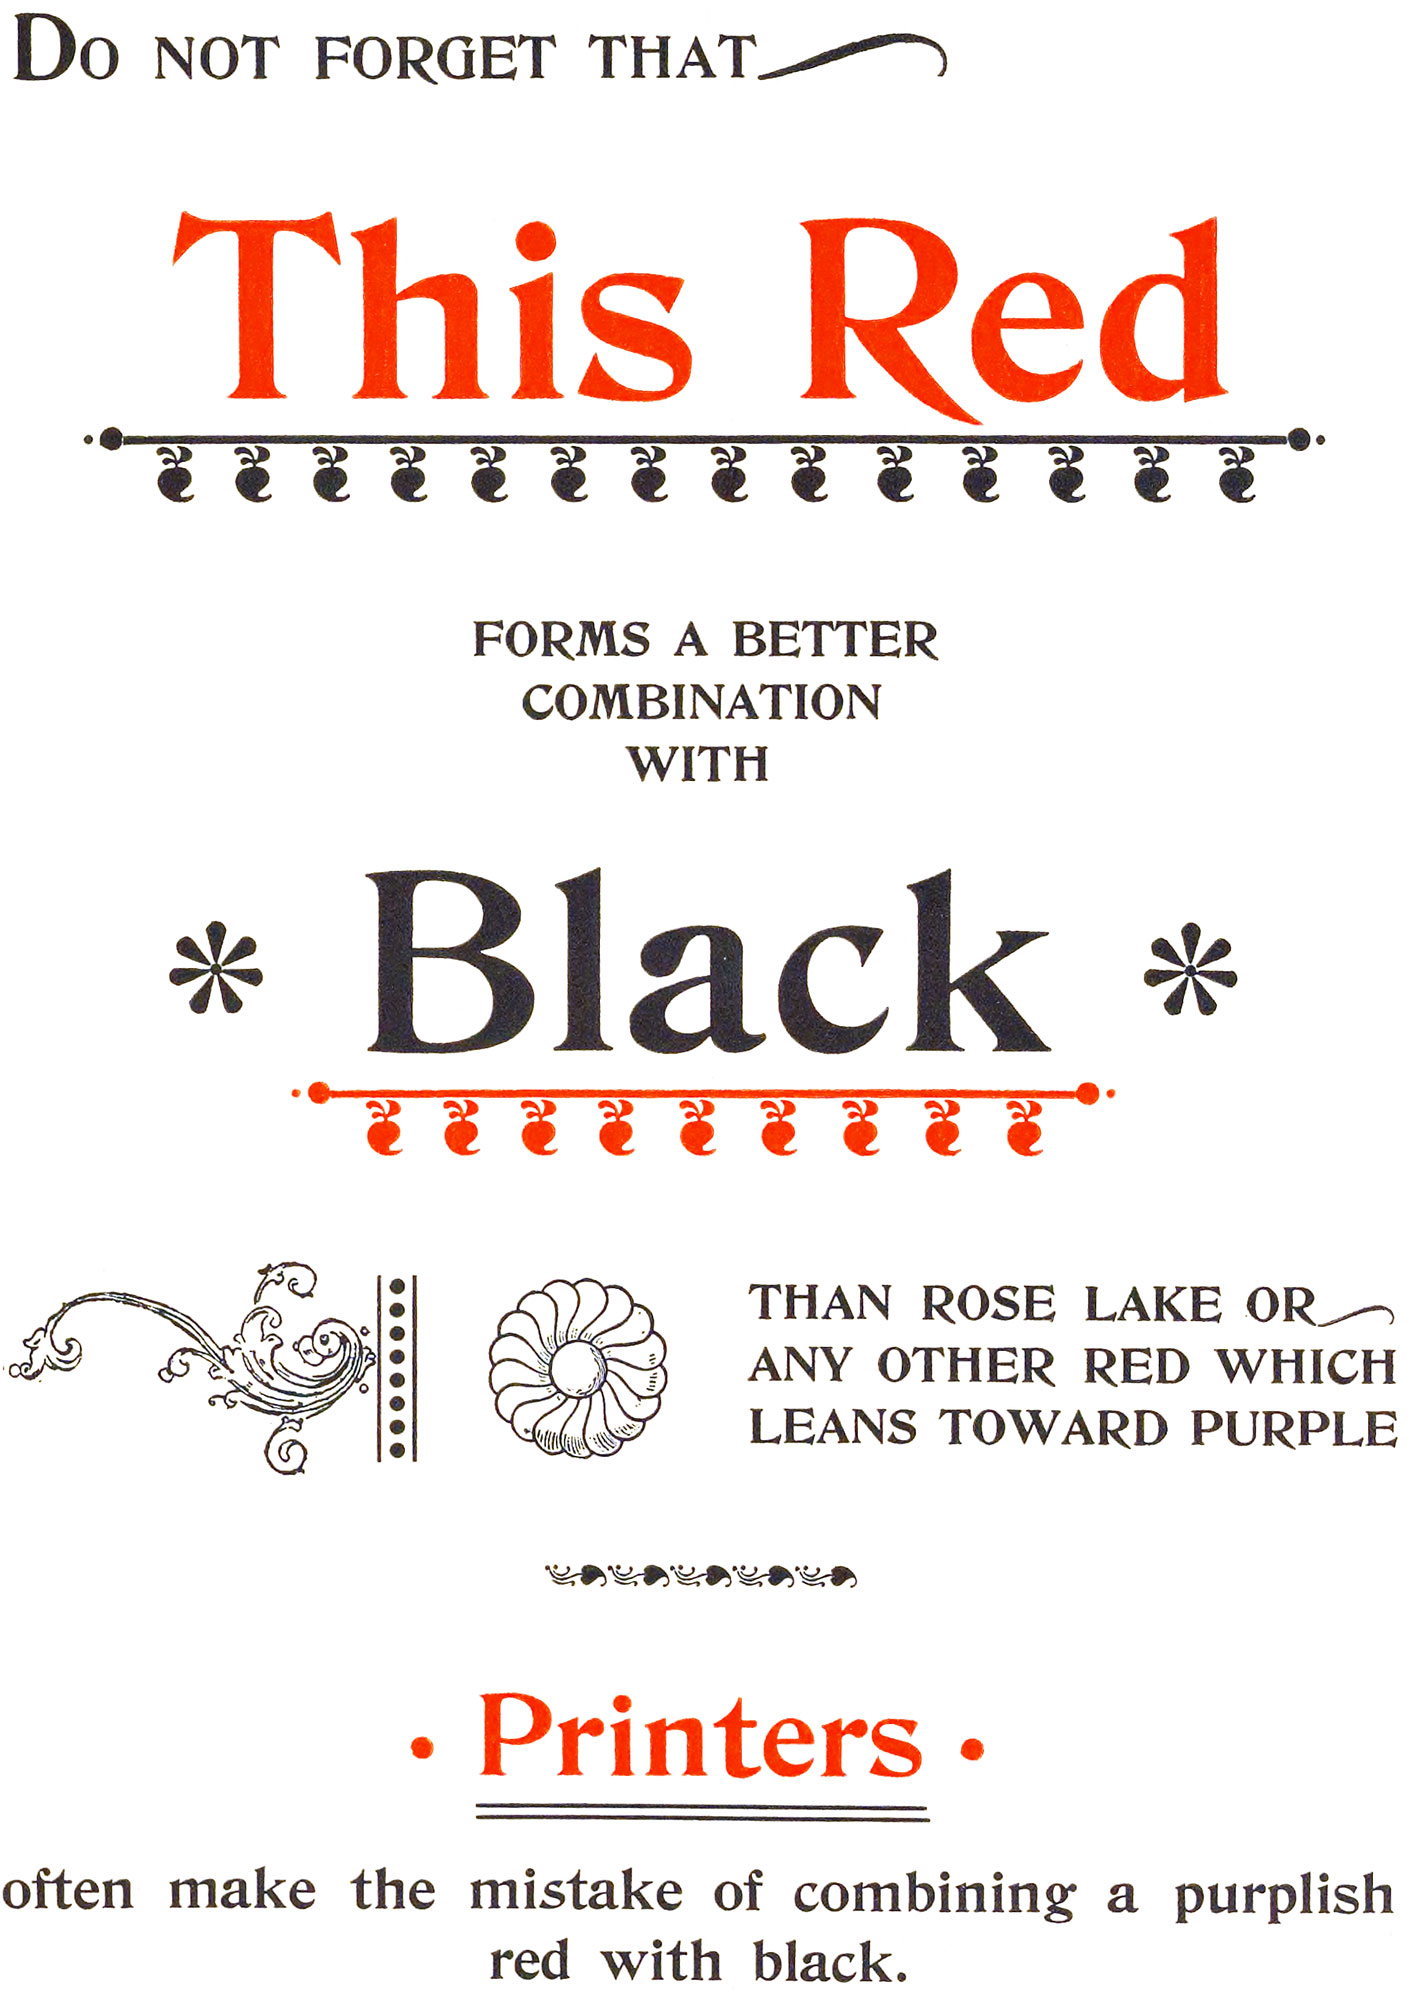 Printing sample of text in red and black